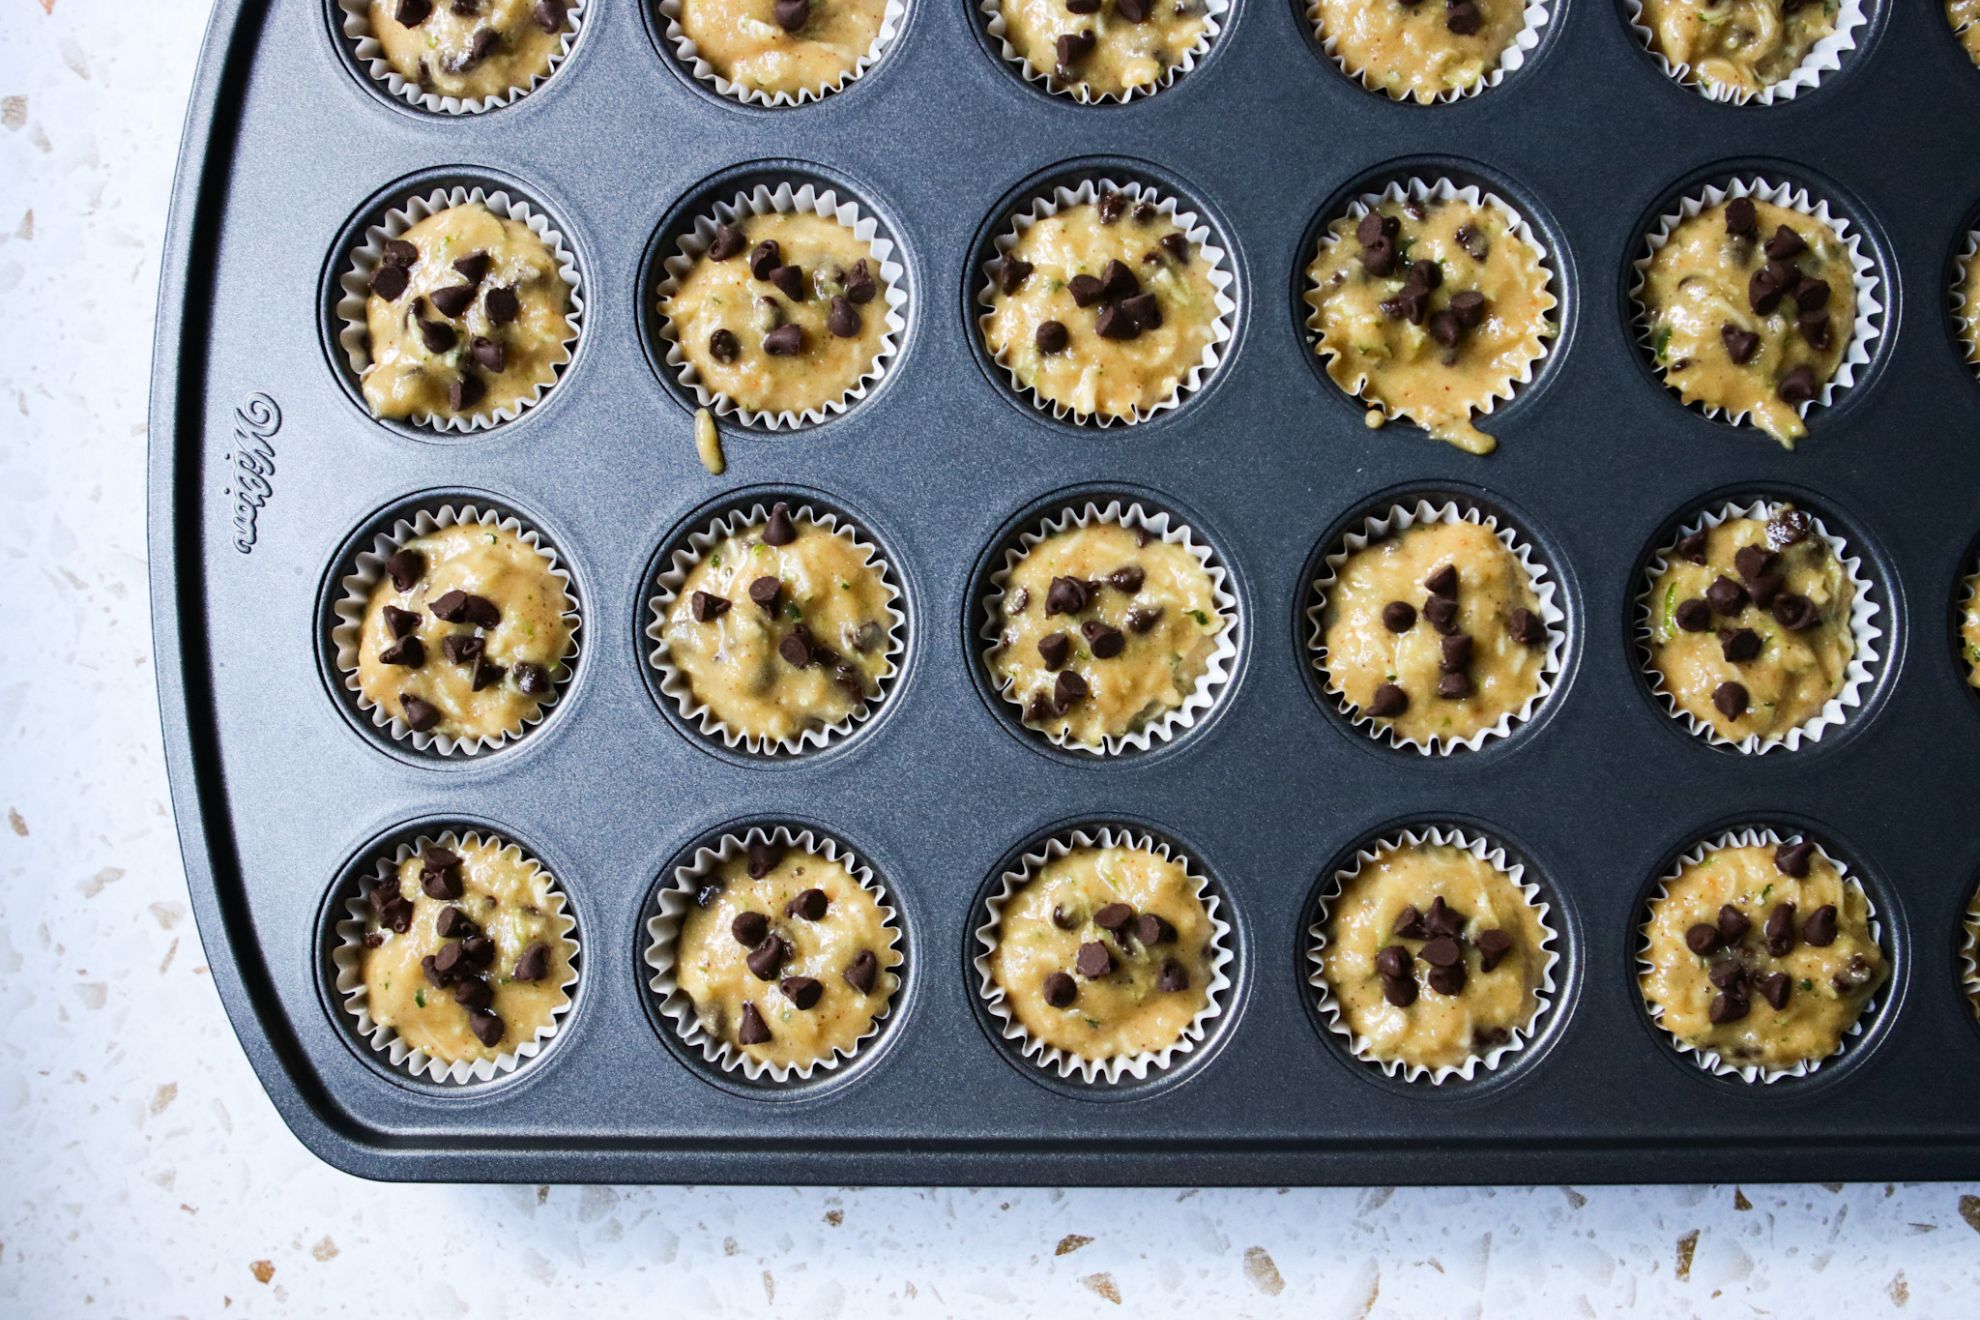 This is an overhead horizontal image of a dark grey mini muffin tin with raw muffin batter in it. On top of the muffins are mini chocolate chips. The muffin pan sits on a white terrazzo surface.